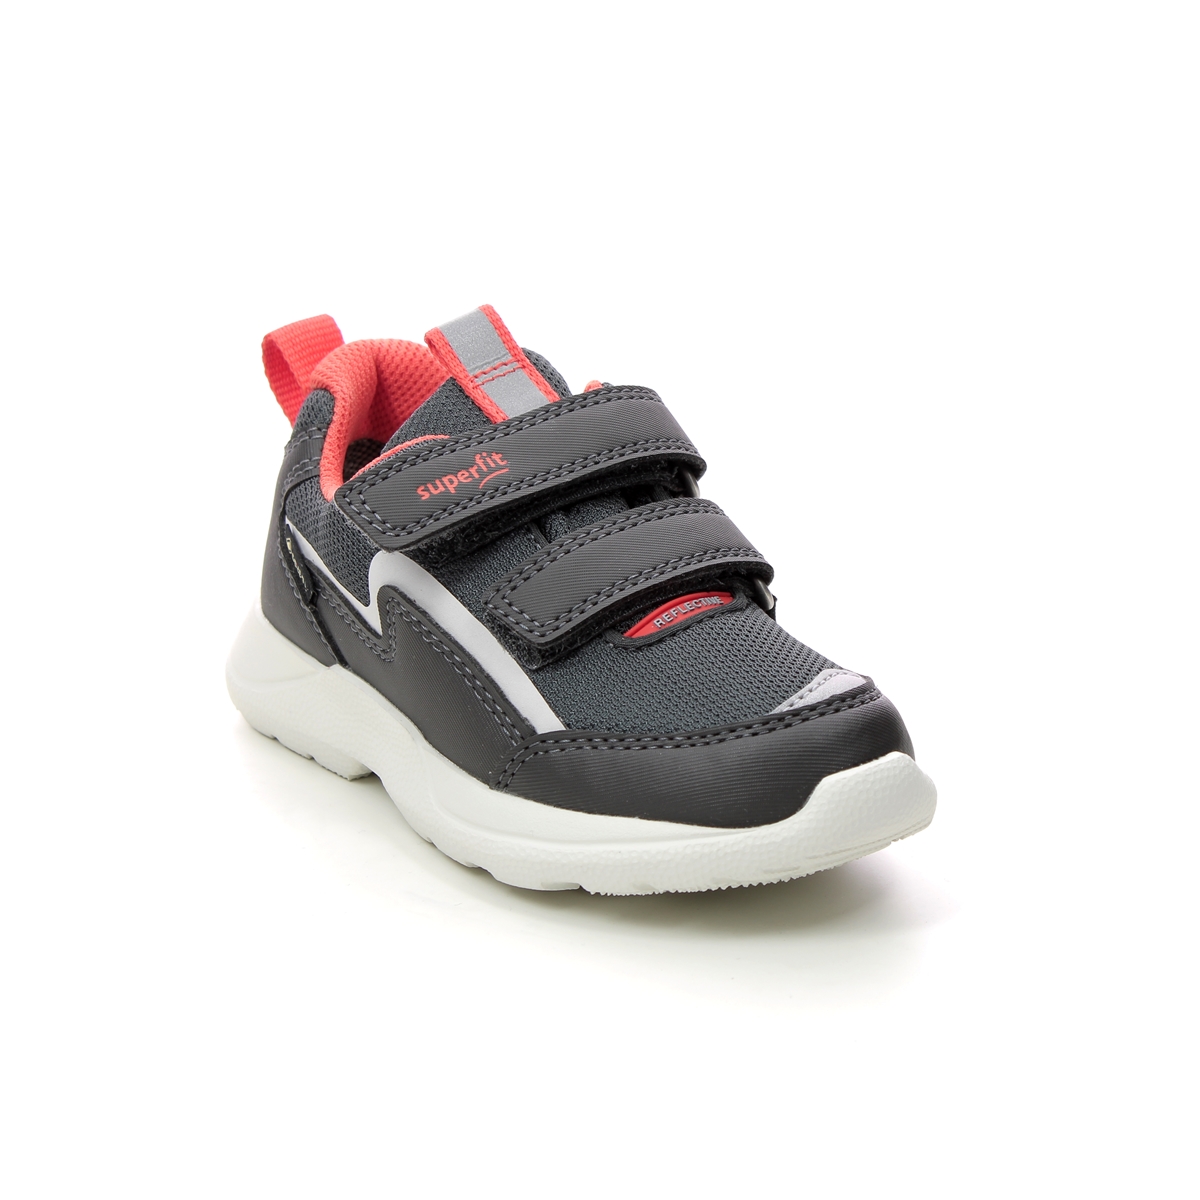 Superfit Rush Mini Gtx Black Red Kids Trainers 1006212-2000 In Size 27 In Plain Black Red For kids